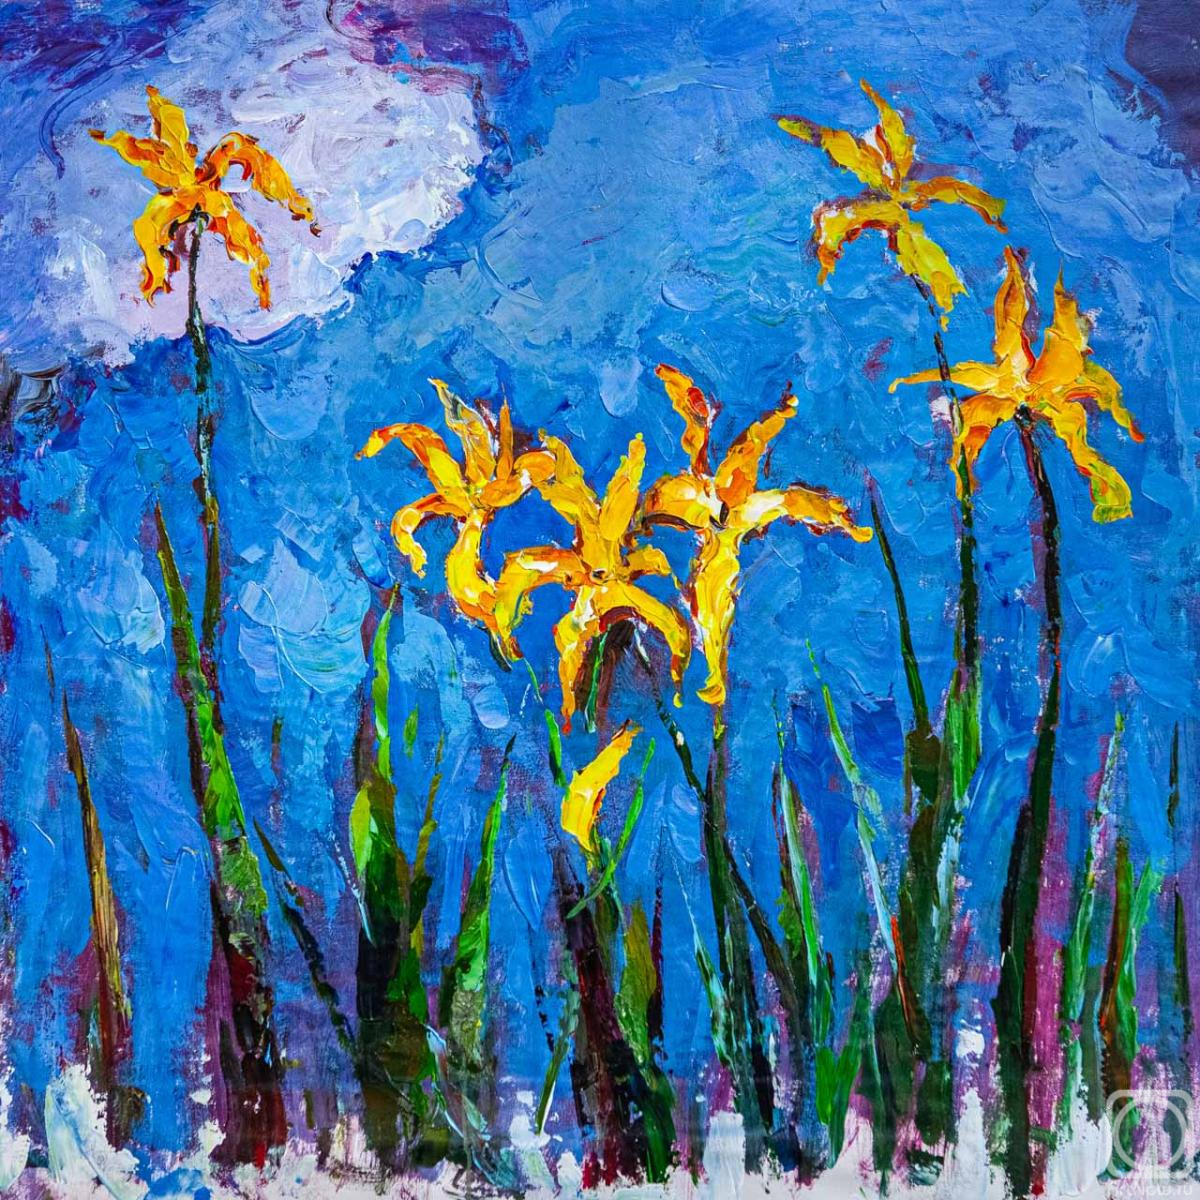 Rodries Jose. A free copy of the painting by Claude Monet. Yellow irises with a pink cloud